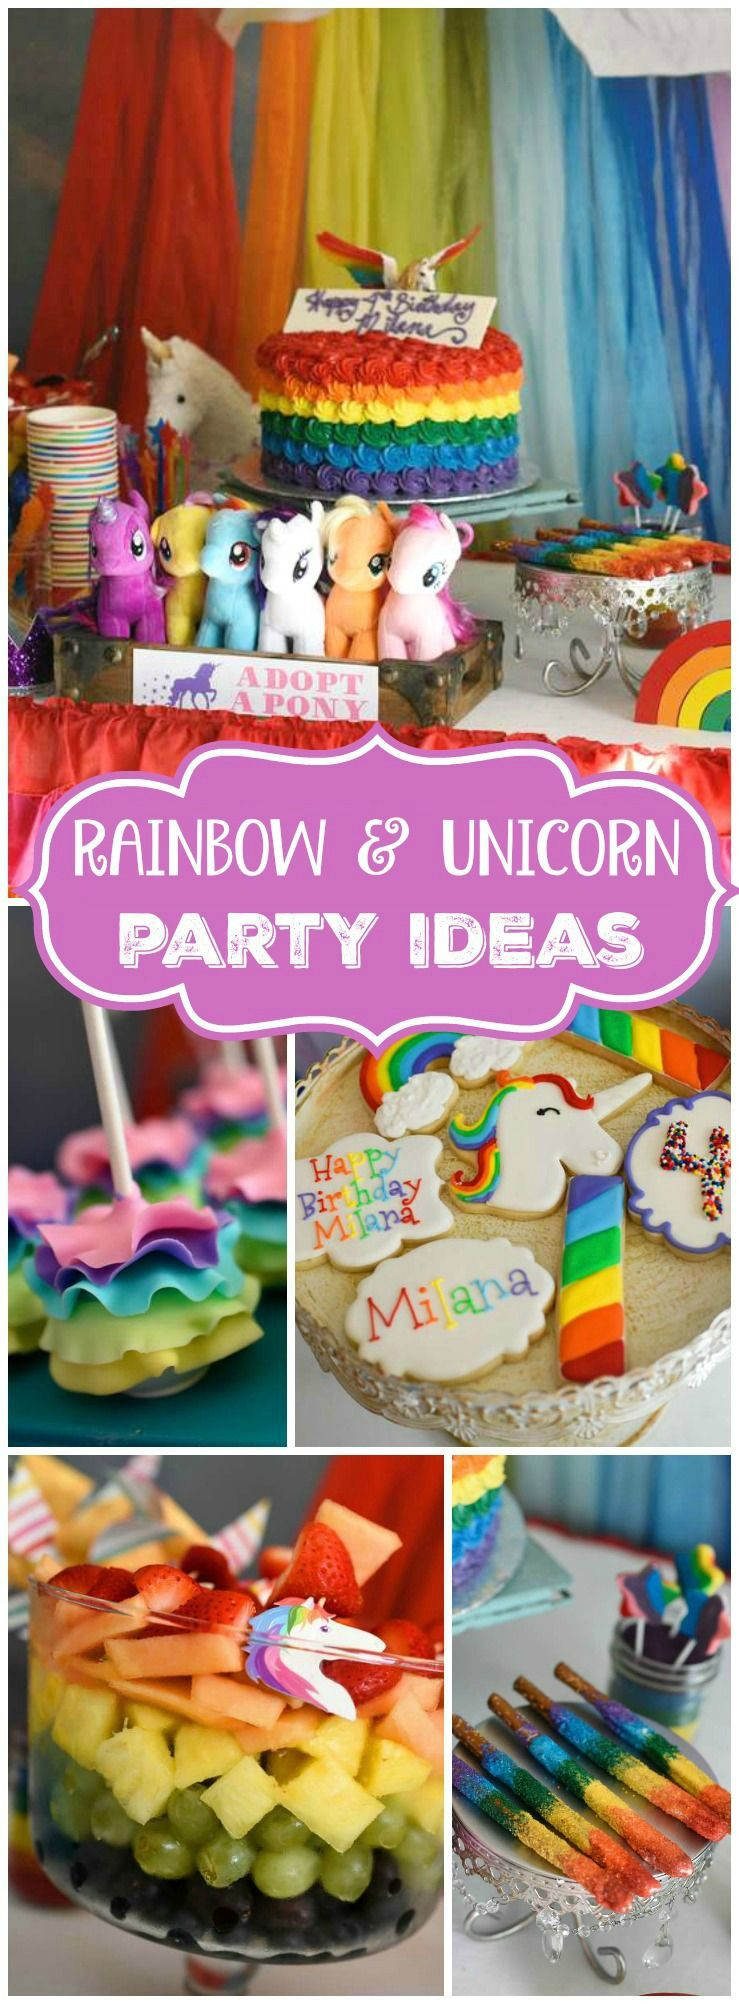 Unicorn Rainbow Party Ideas
 You must see this unicorns and rainbows birthday party